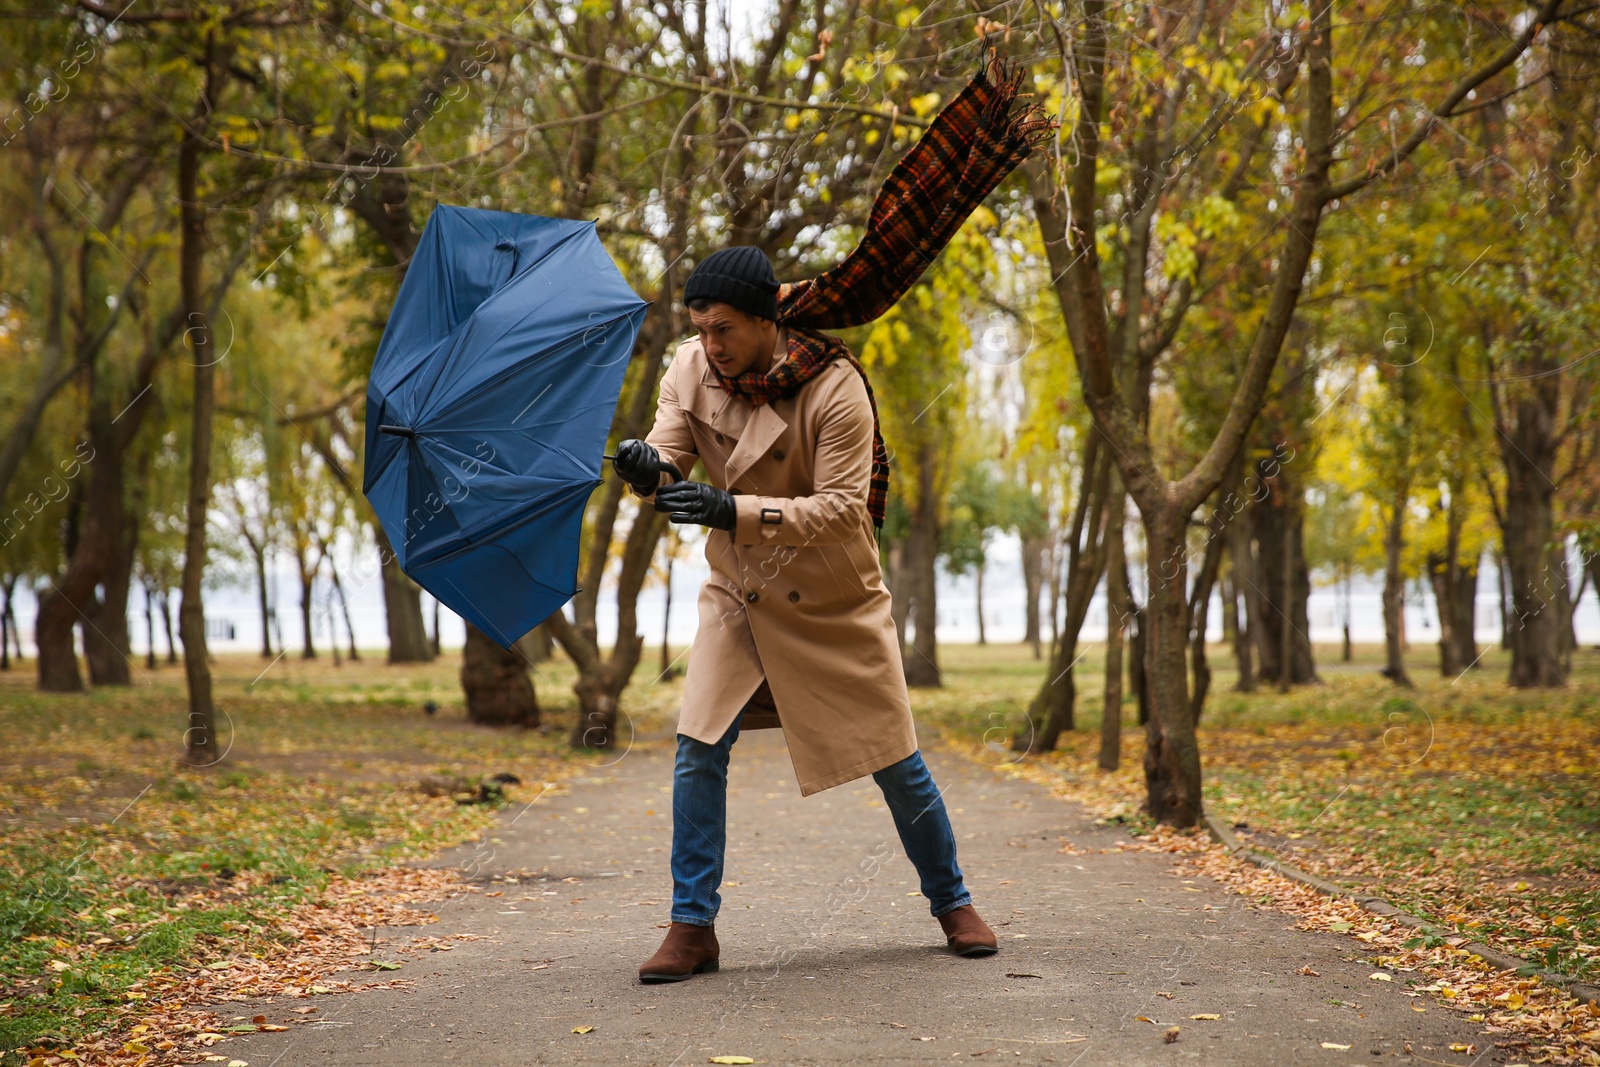 Photo of Man with blue umbrella caught in gust of wind outdoors